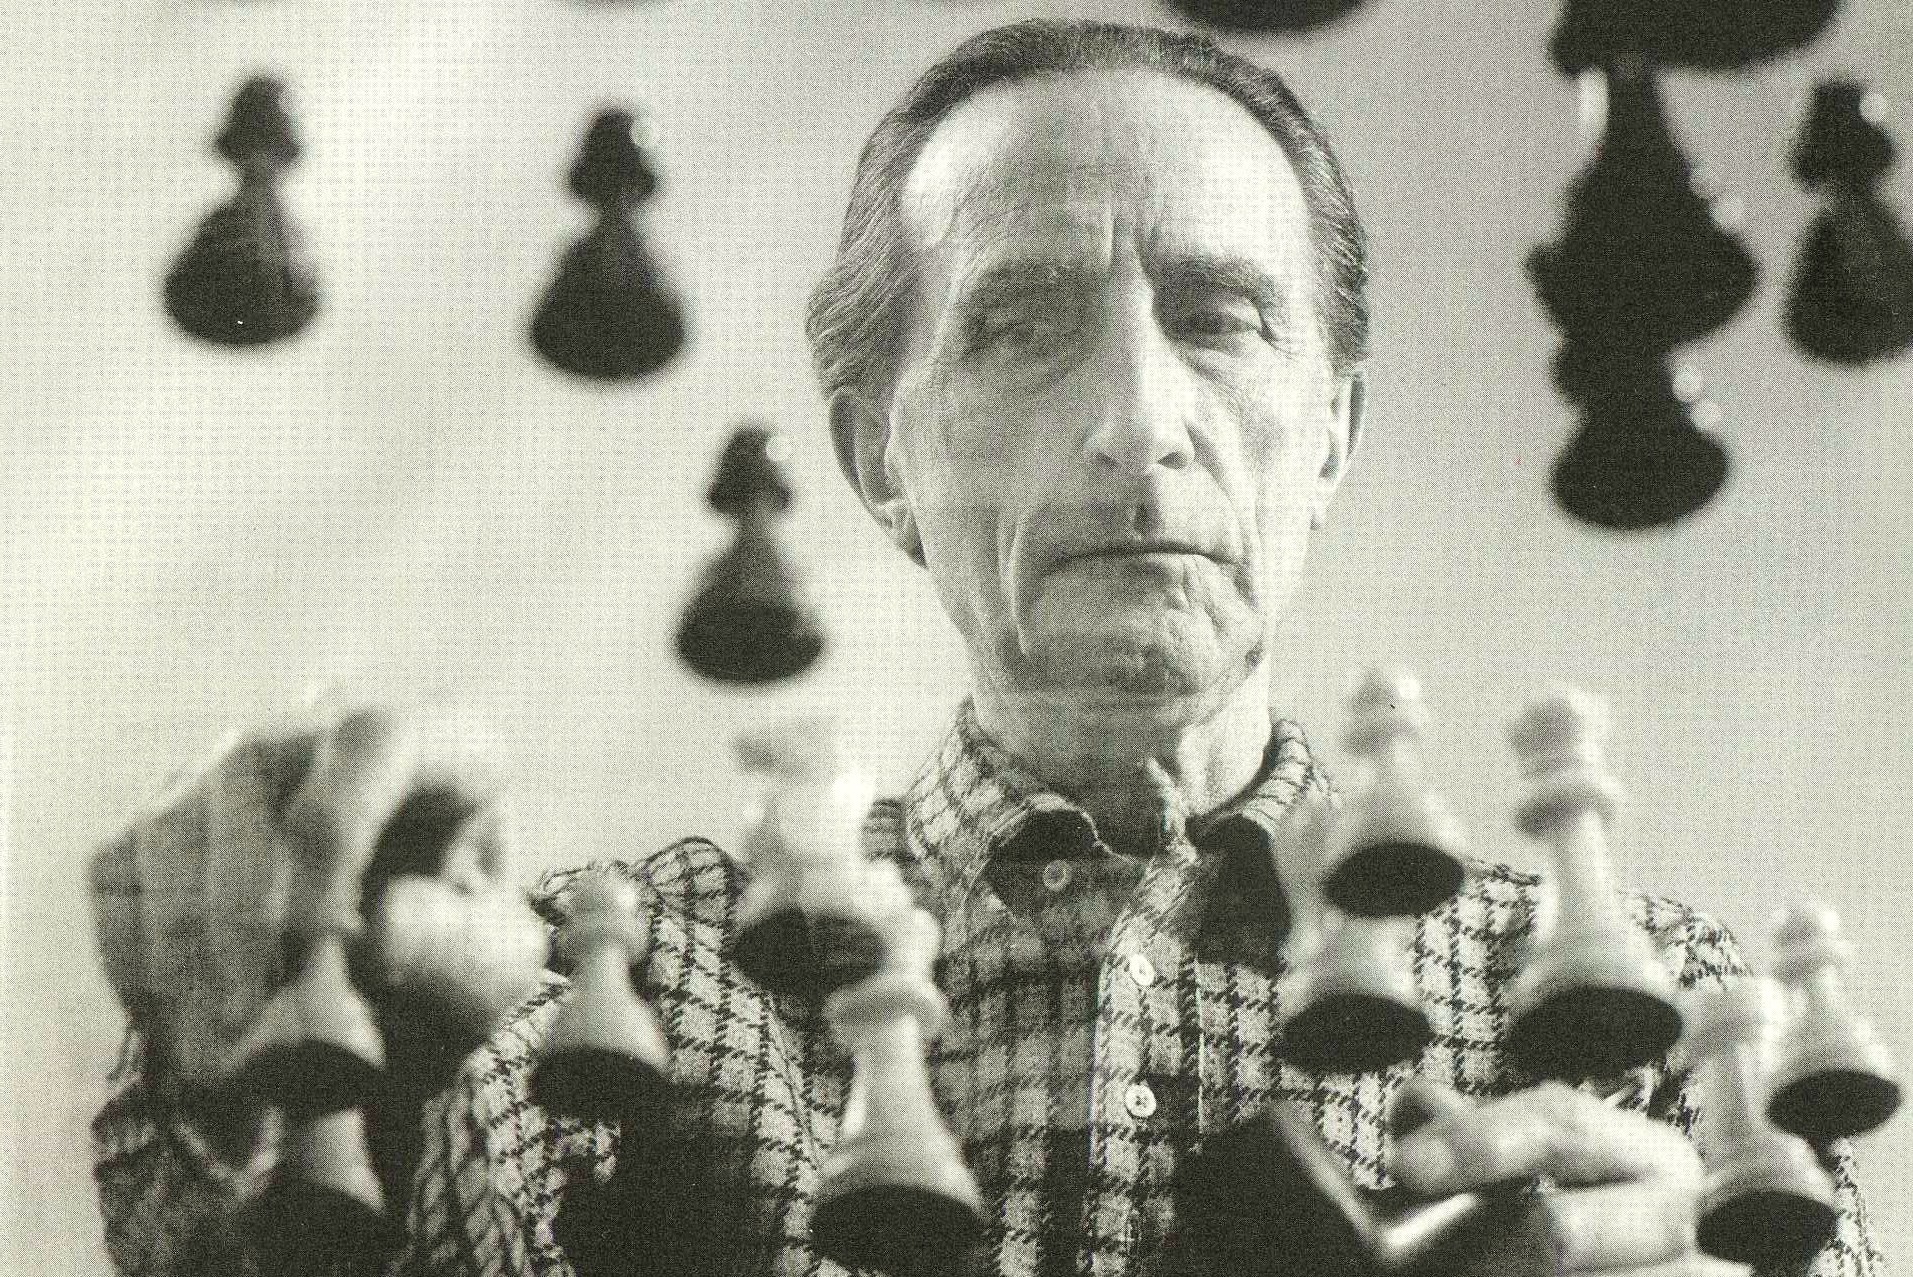 photograph of Marcel Duchamp playing chess. Shot from below a clear glass chess table.